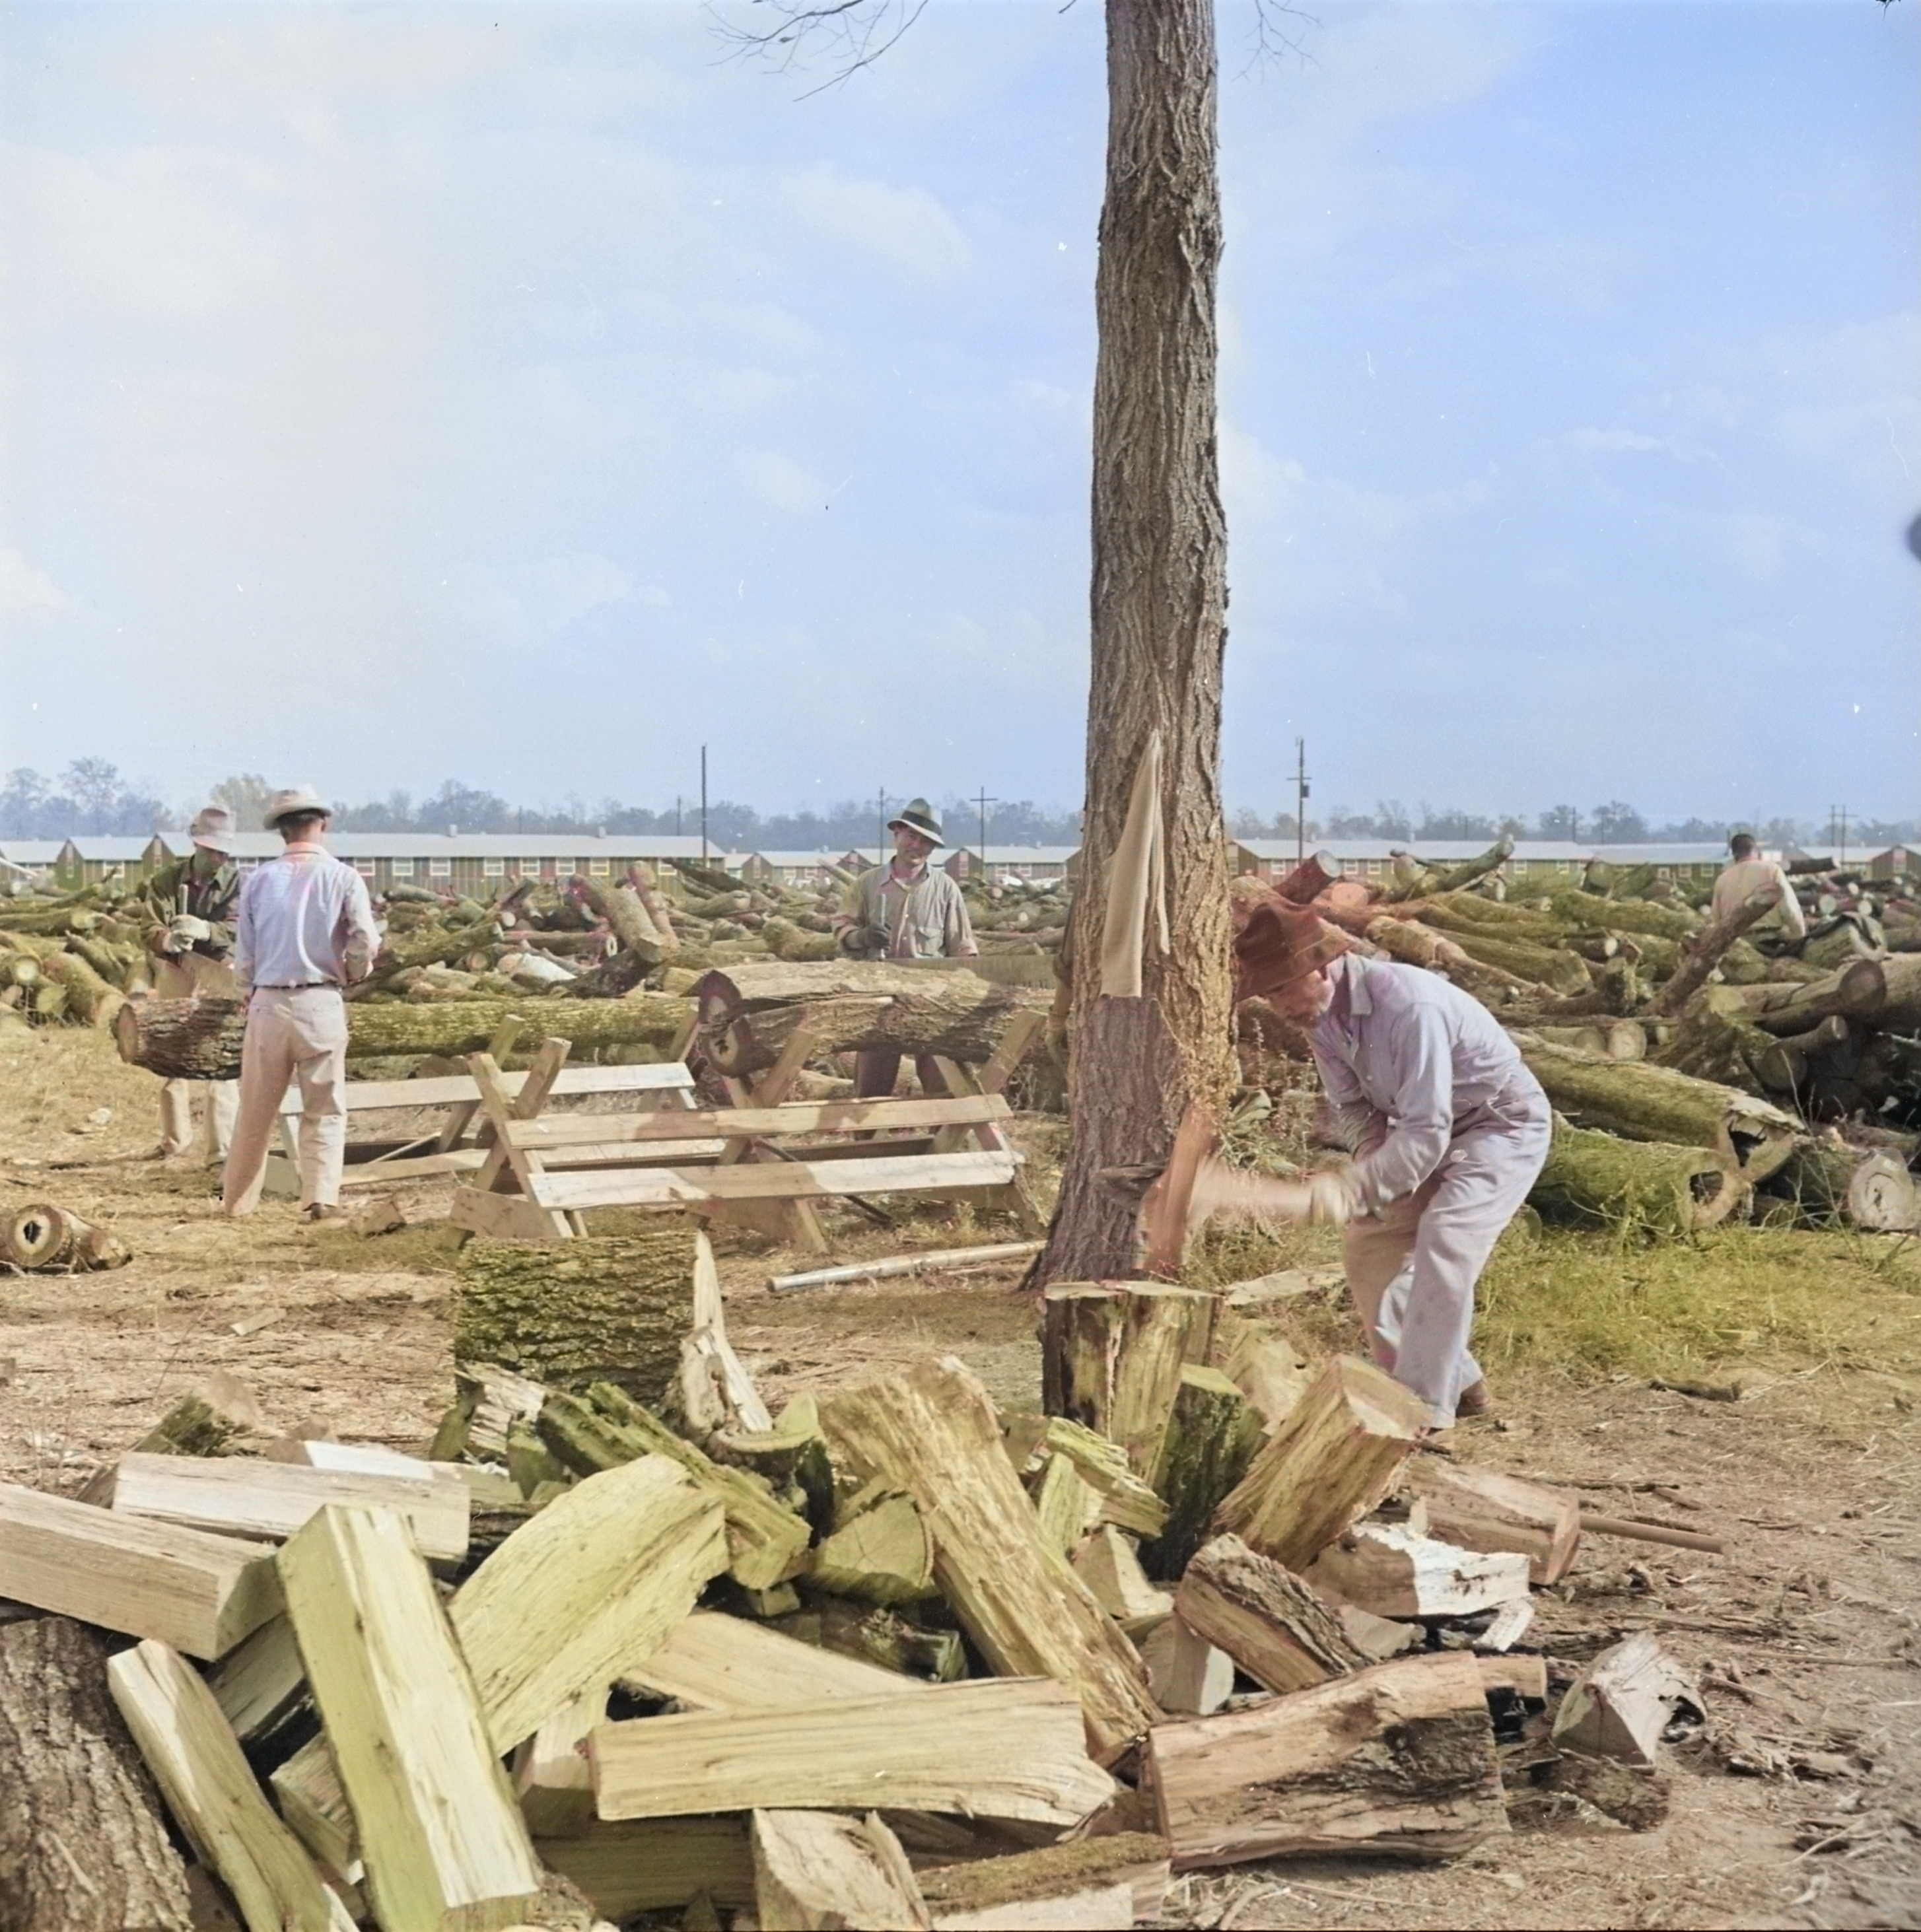 Woodcutting at Jerome War Relocation Center, Arkansas, United States, 17 Nov 1942, photo 1 of 2 [Colorized by WW2DB]